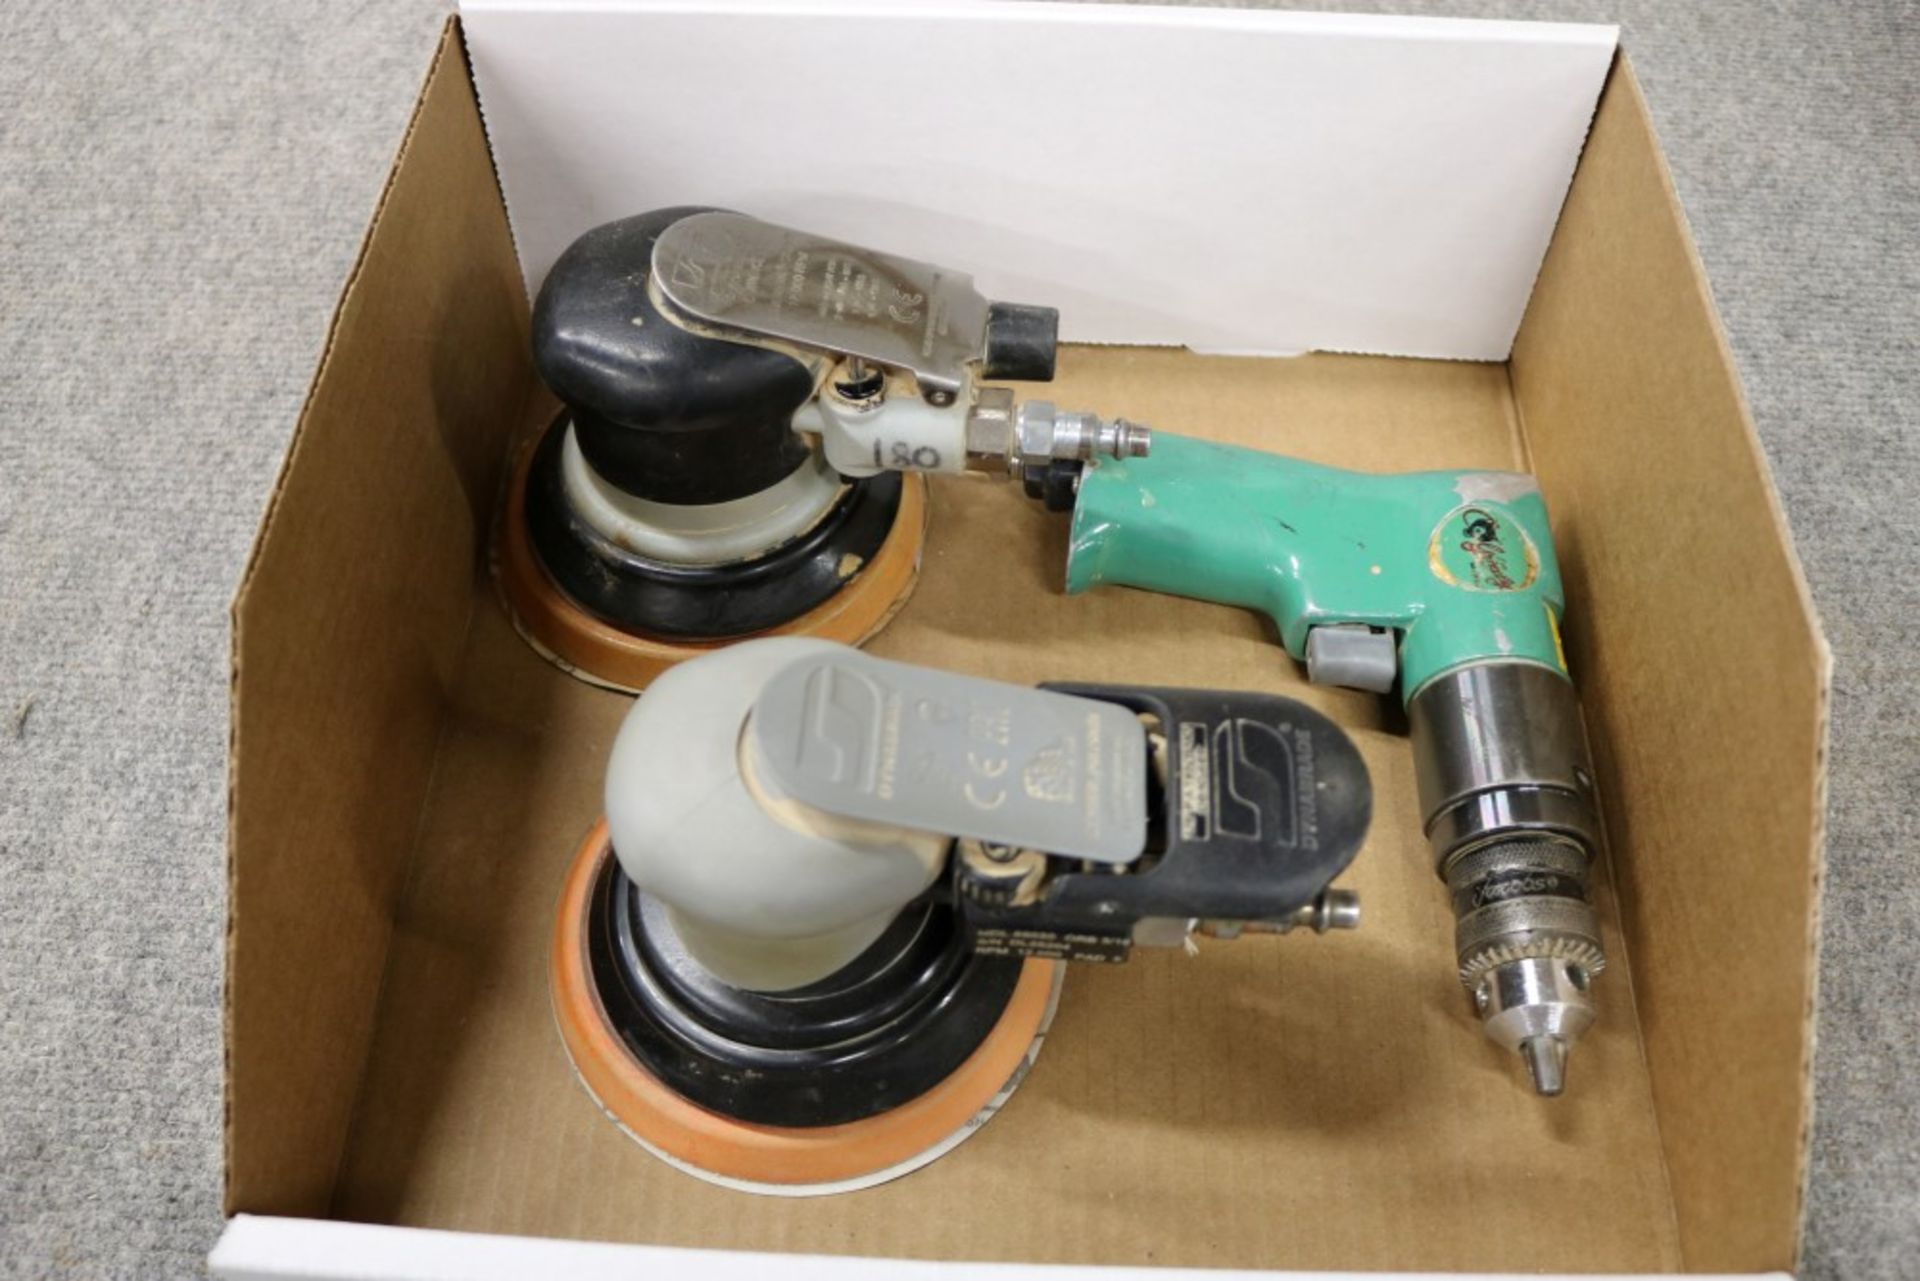 Grizzly Pneumatic Drill, Dynabrade Dynorbital Sander 12,000 RPM, and Dynabrade Orbital Sander/ - Image 2 of 12